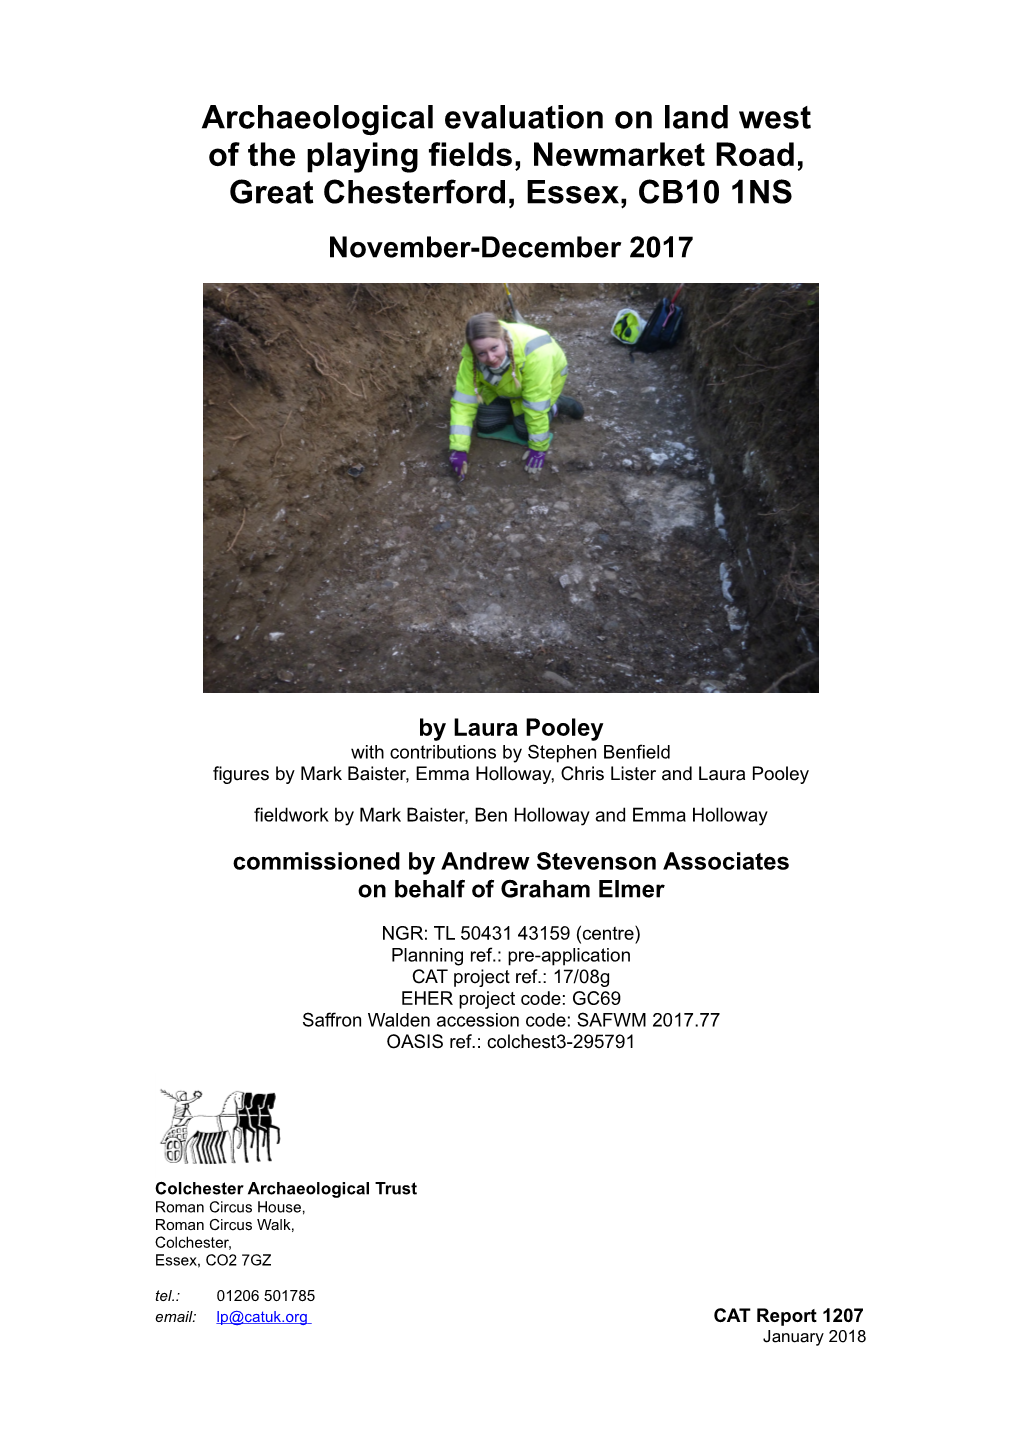 Archaeological Evaluation on Land West of the Playing Fields, Newmarket Road, Great Chesterford, Essex, CB10 1NS November-December 2017